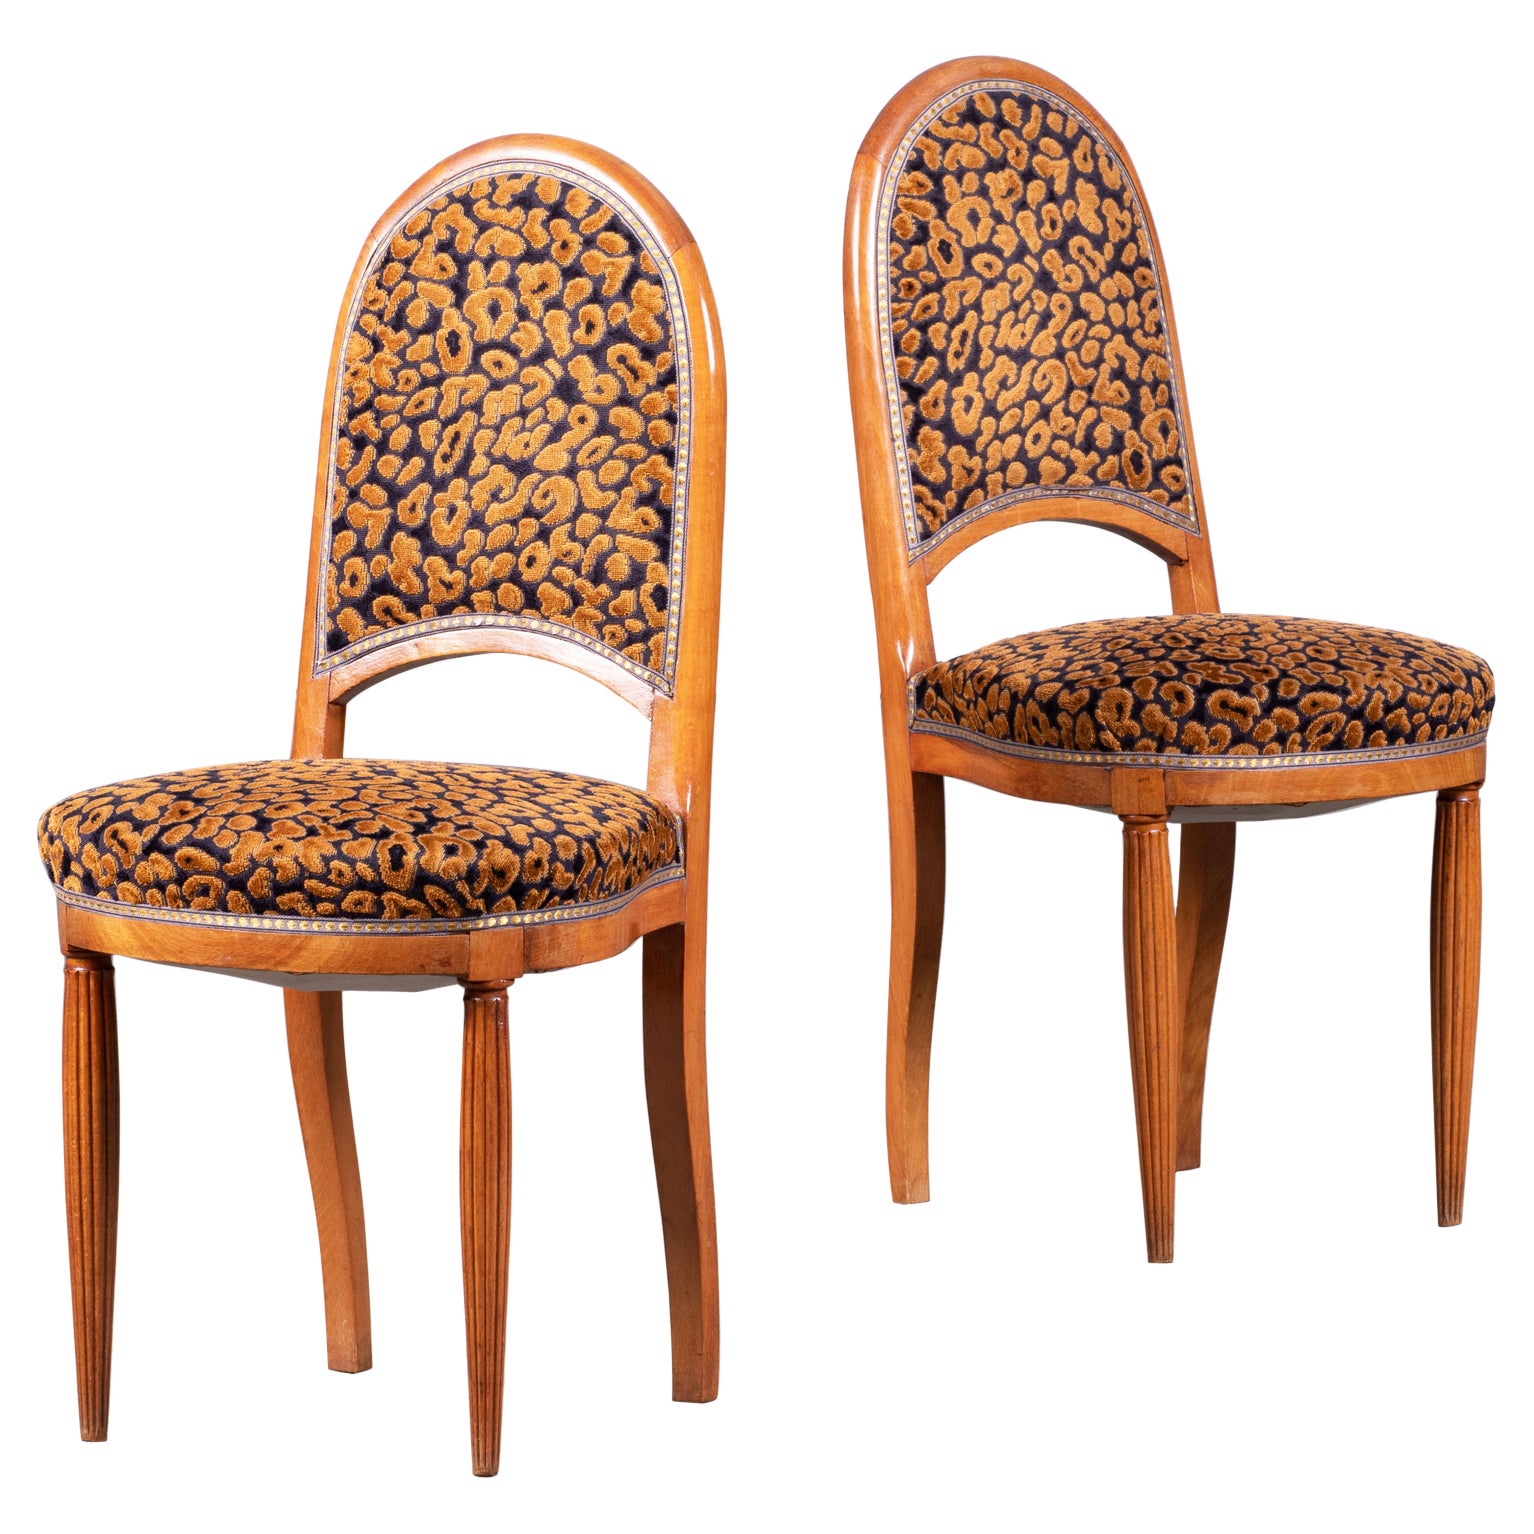 Pair of Art Deco Chairs Att. Maurice Jallot, c1940 For Sale